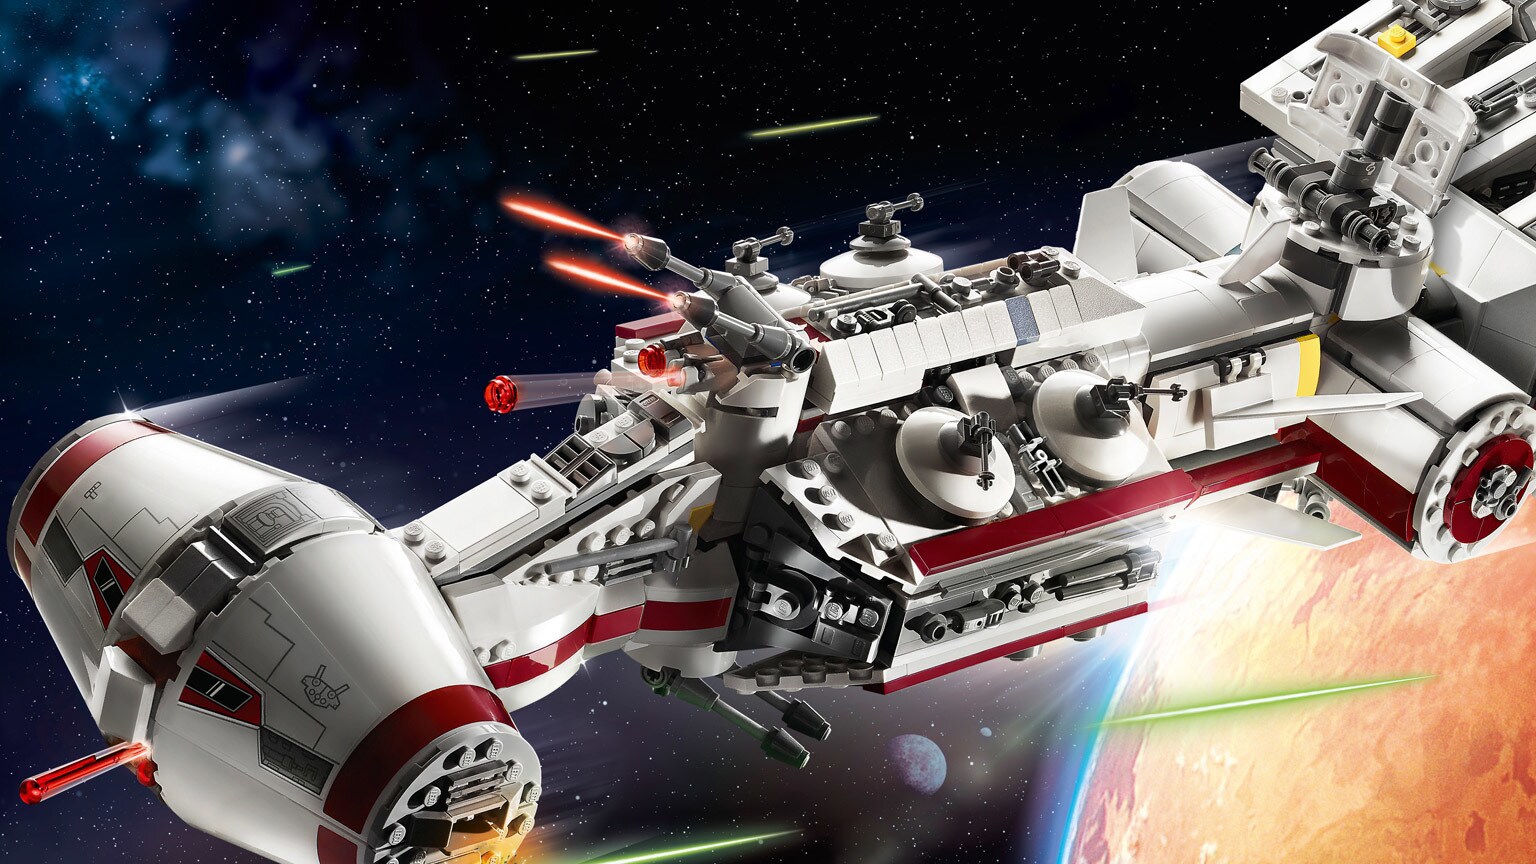 SWCC 2019: 6 Things We Learned from the LEGO Star Wars 20th Anniversary Panel